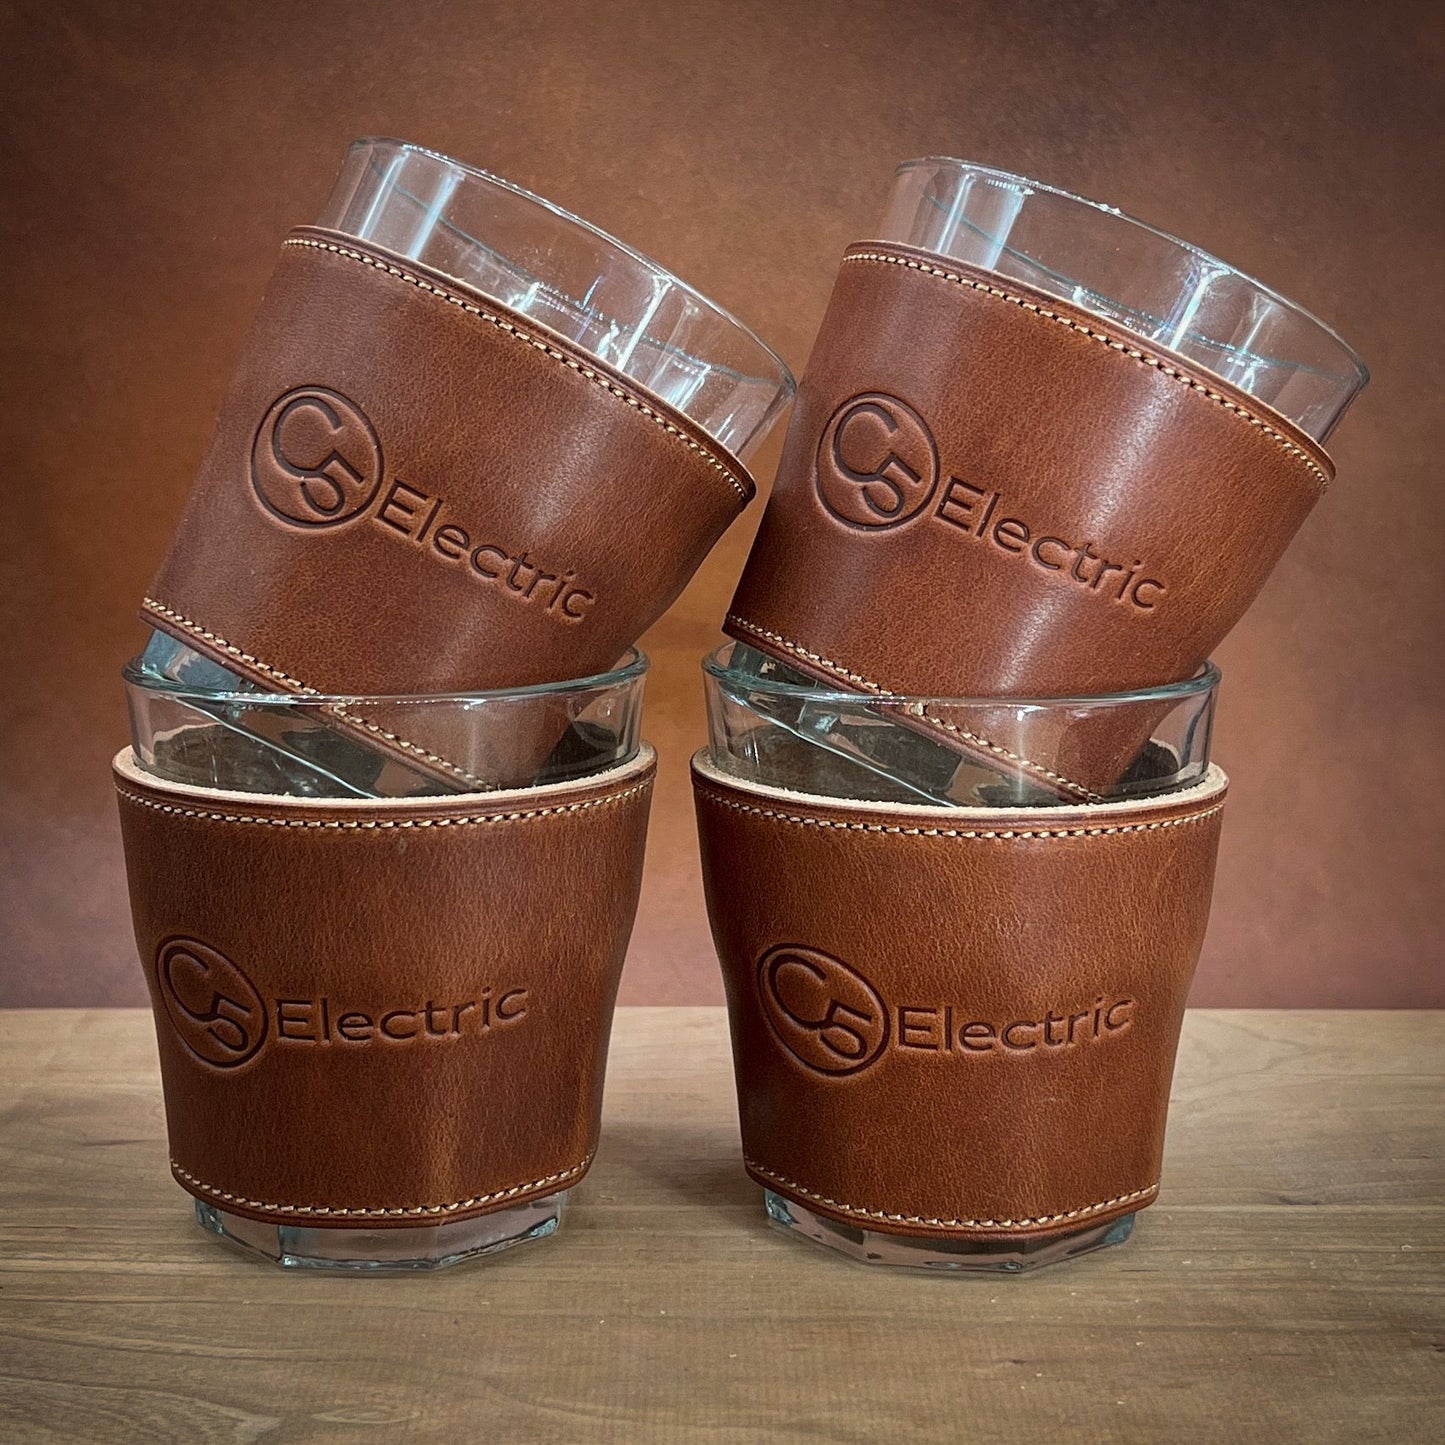 Leather Wrapped Tumbler Glasses with Corporate Logos | Handmade to order in Houston, TX